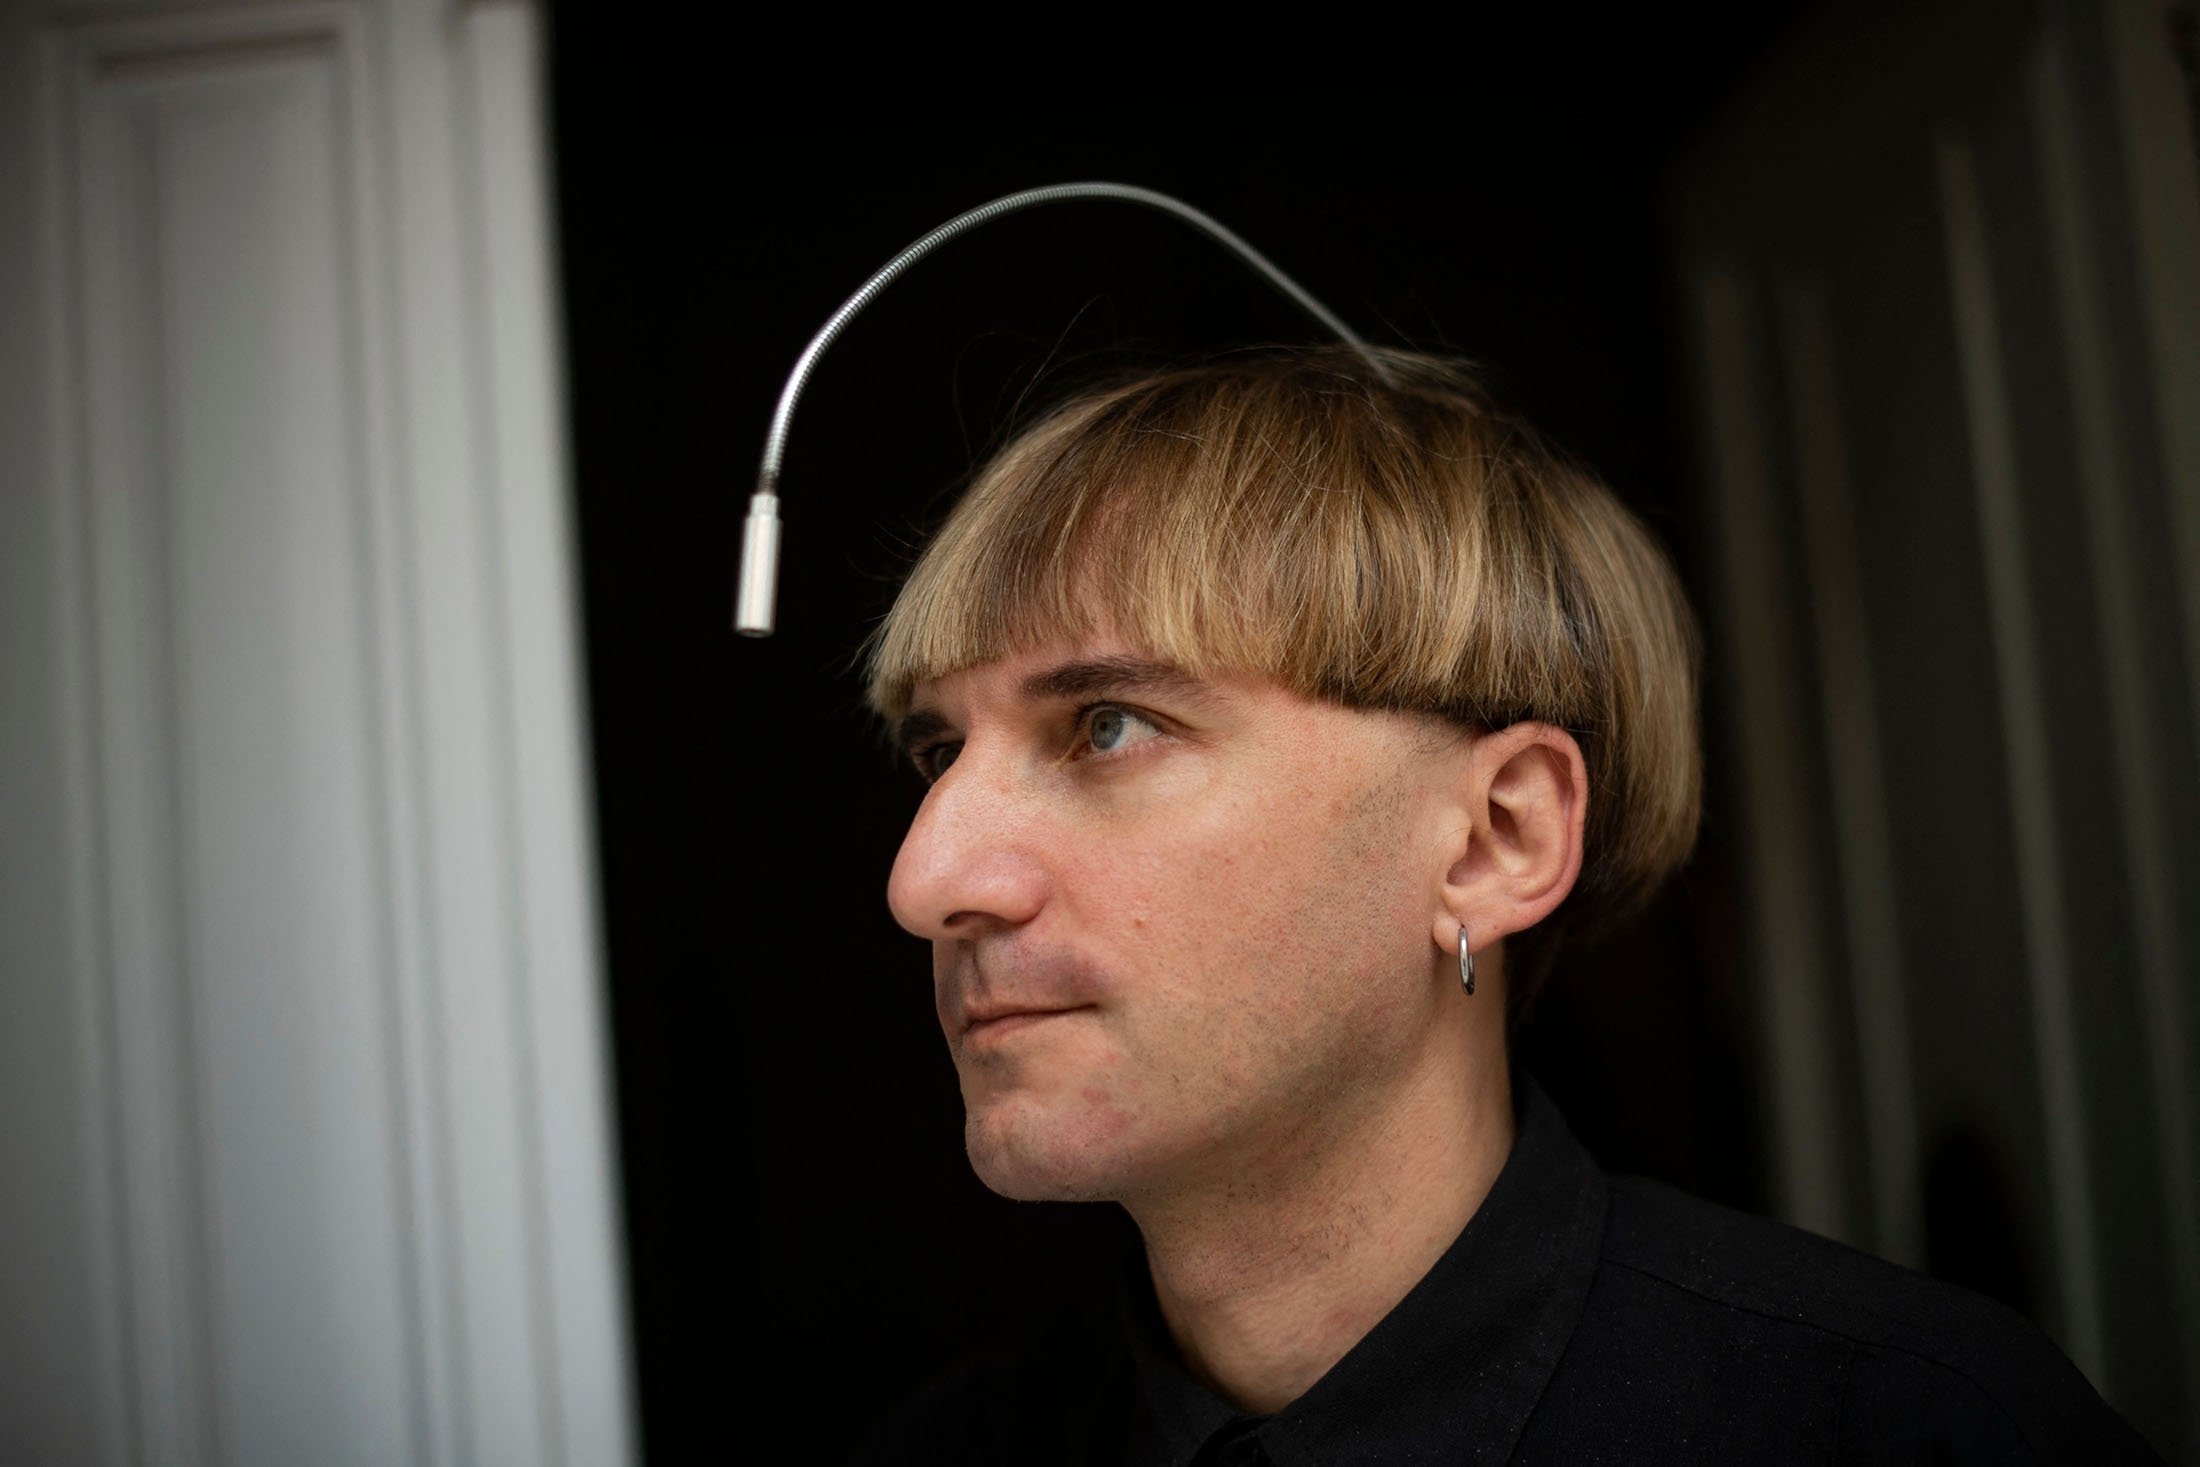 Spanish-born British-Irish “cyborg” artist and activist for transpecies rights, Neil Harbisson, poses for a photo, in Mataro near Barcelona, Spain, Sept. 23, 2021. (AFP Photo)